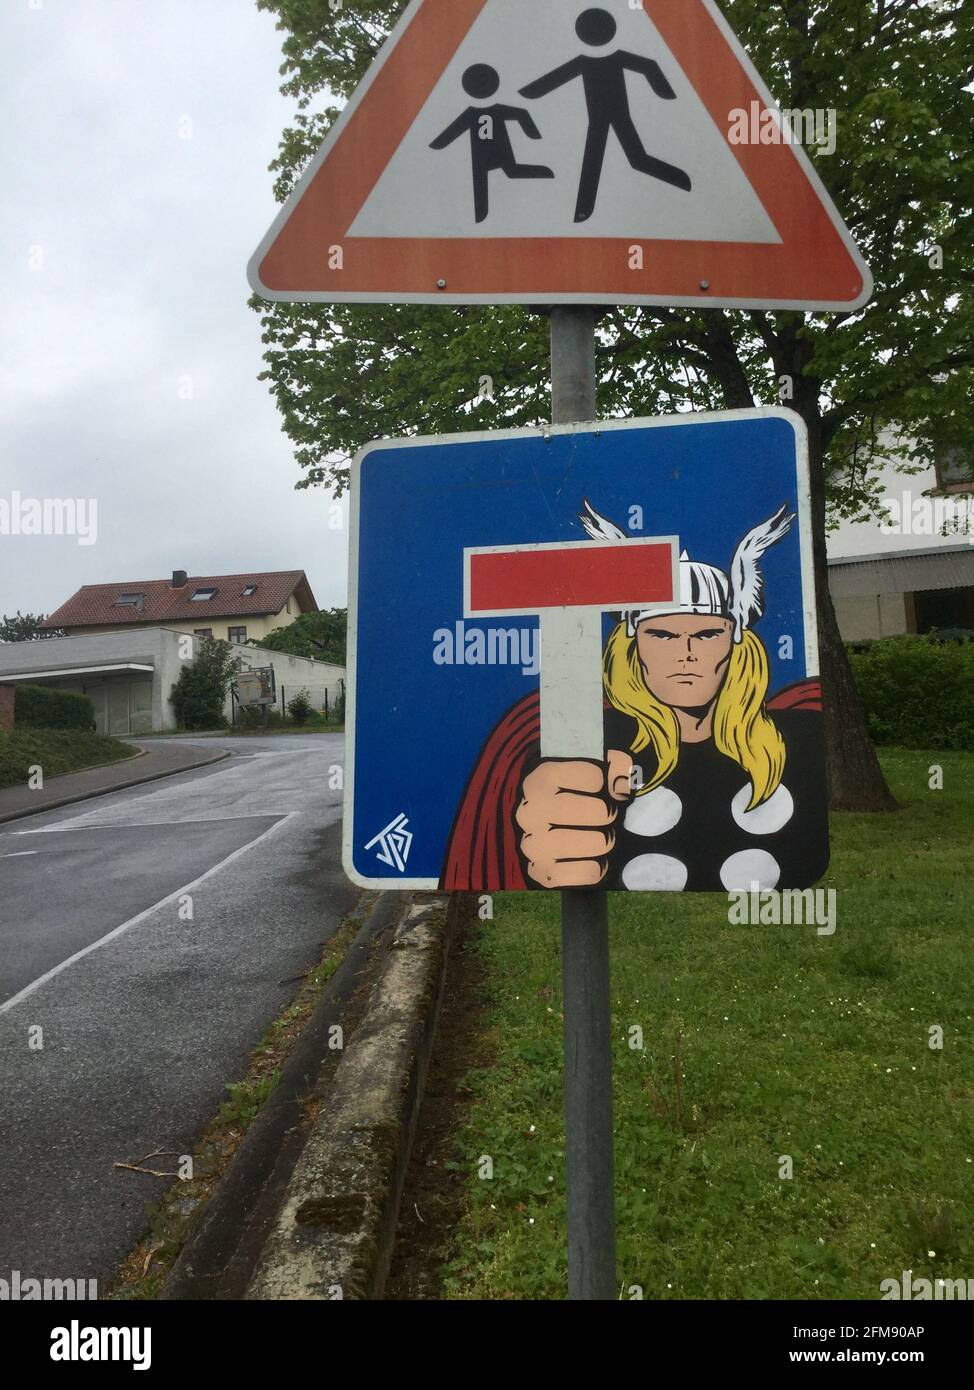 WESTON-SUPER-MARE, UK: A Viking character holding a traffic sign as if it is a weapon. THIS BRITISH graffiti artist has created a quirky series of min Stock Photo